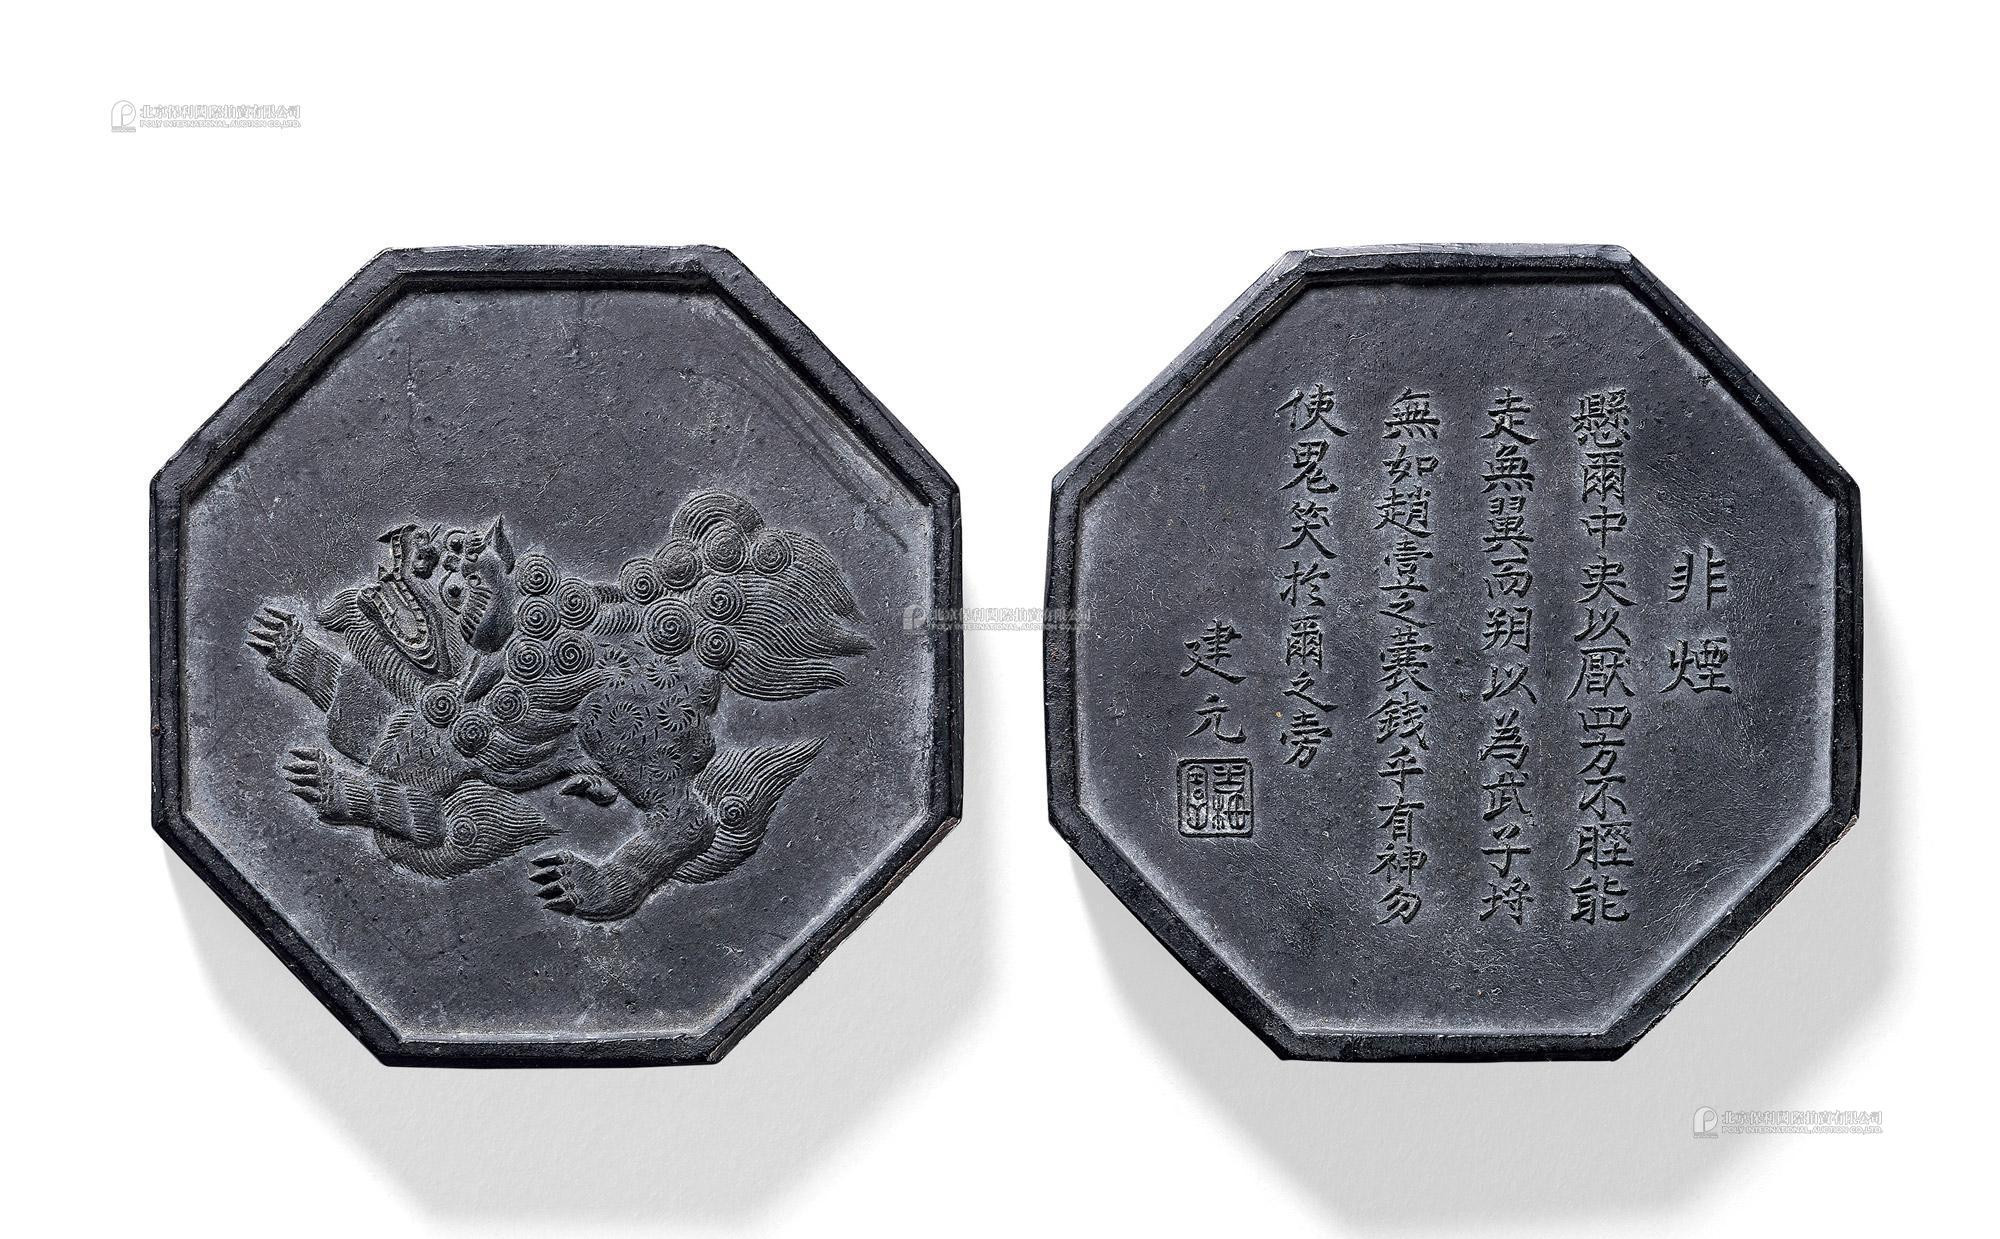 A INK STICKS WITH DESIGON OF LION MADE BY FANG YULU